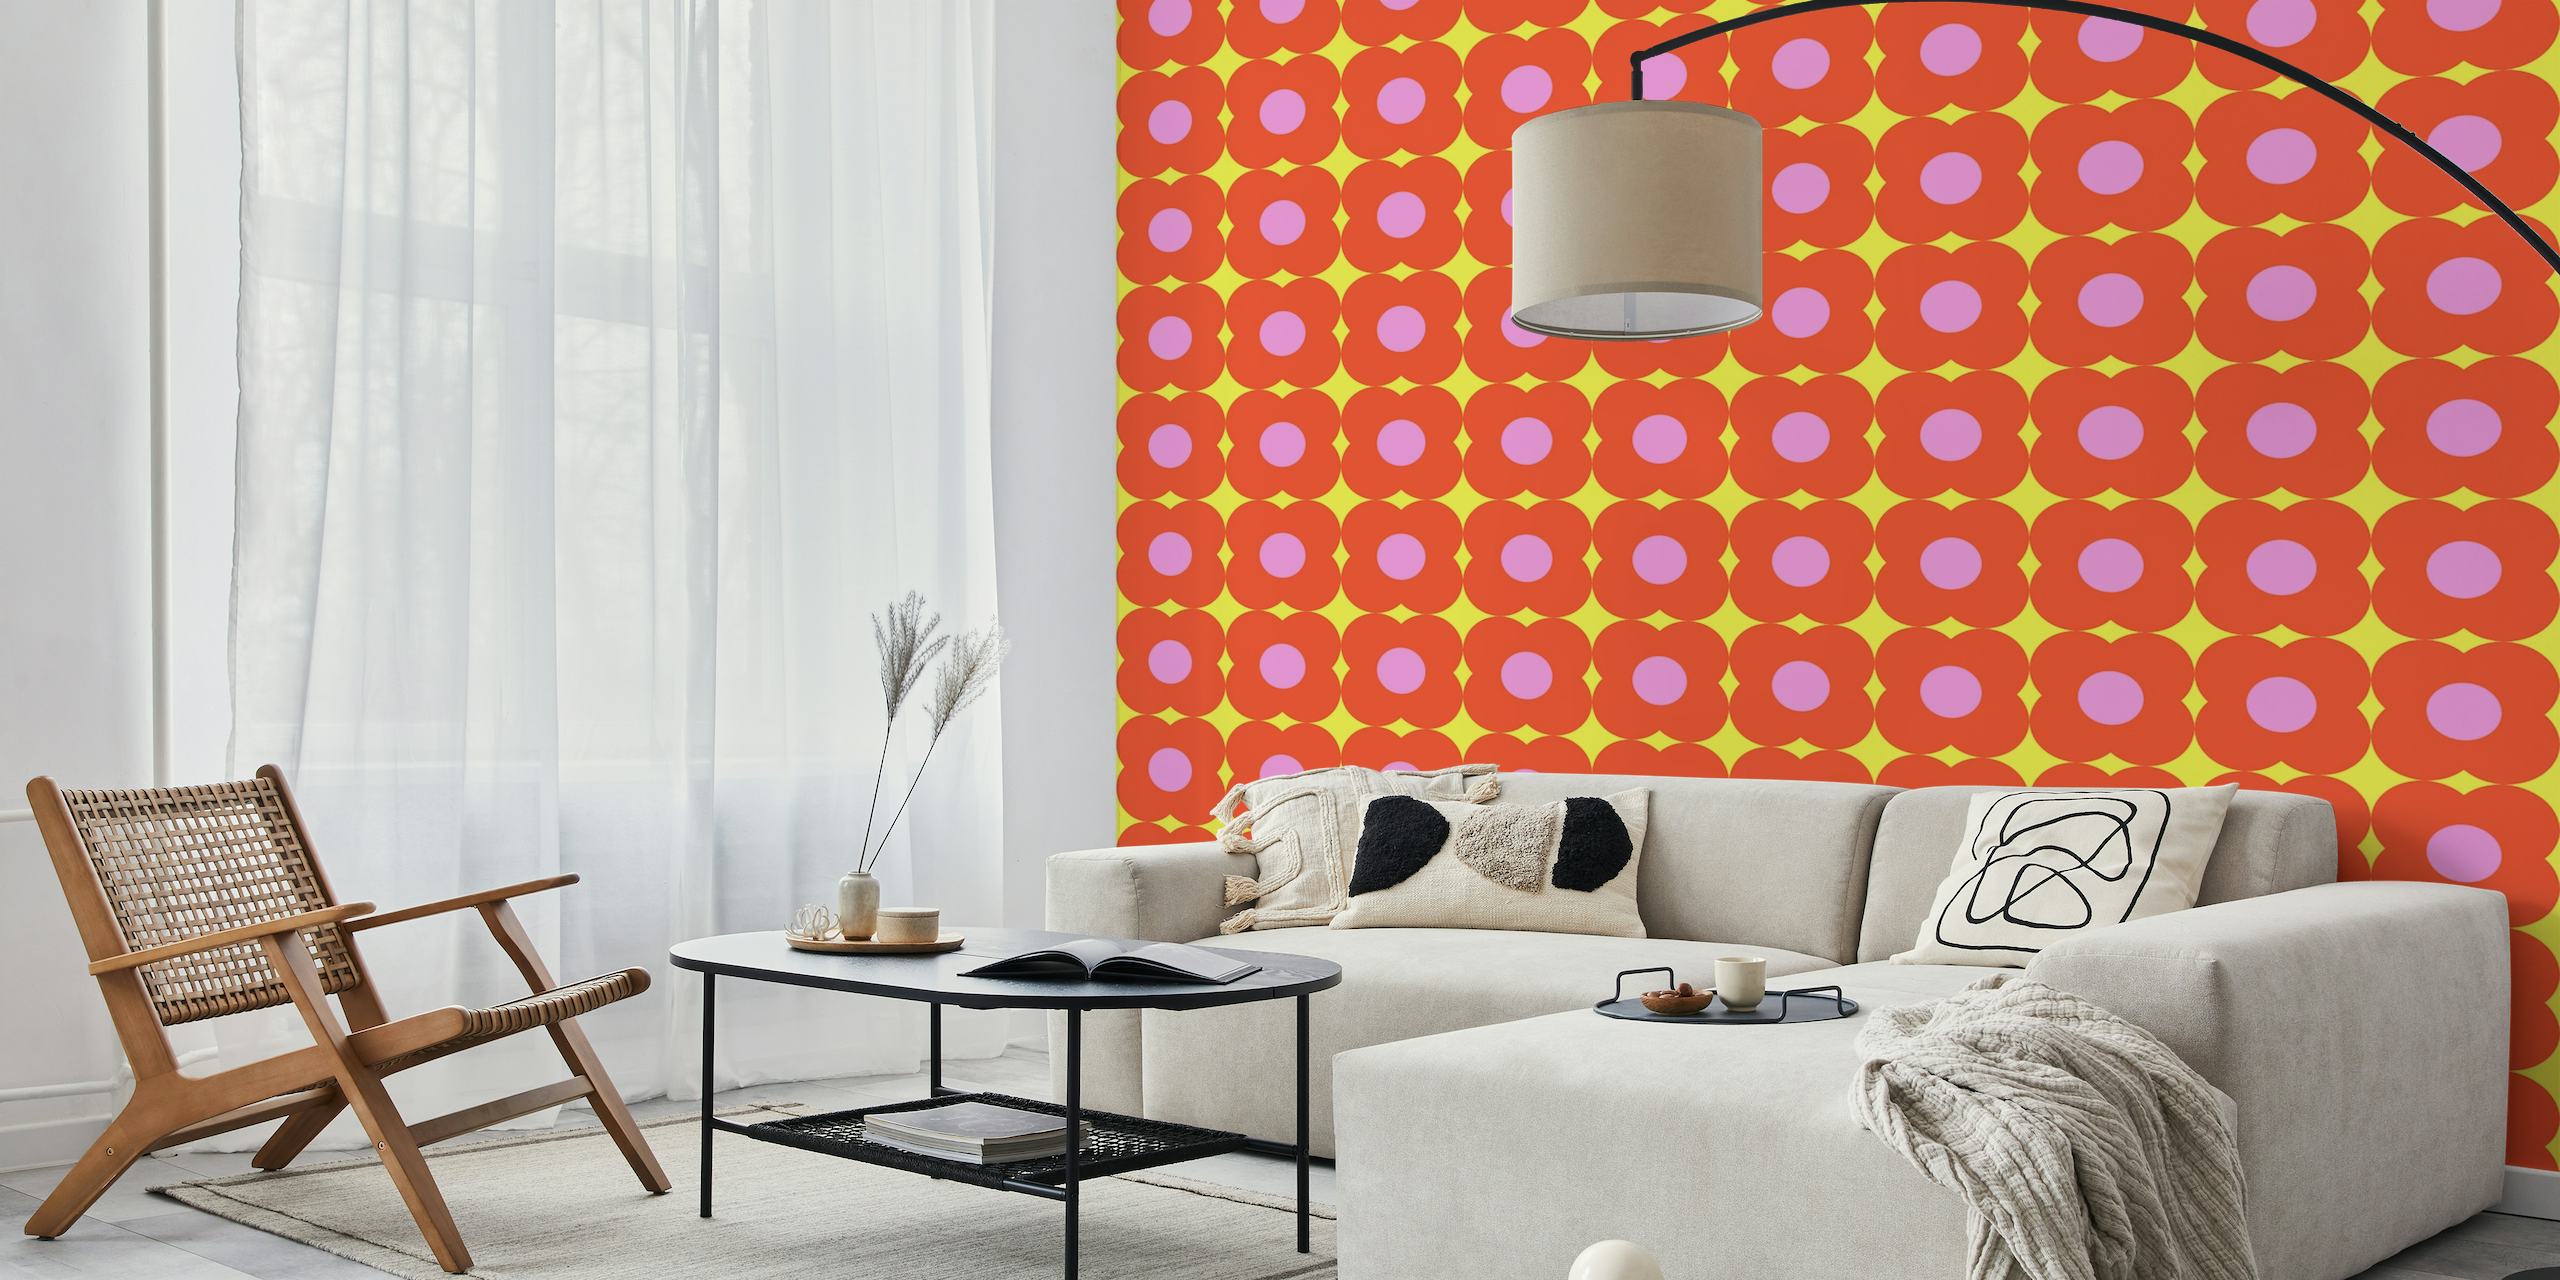 Retro Orange Geometric Flowers wall mural showing a pattern of bold orange and geometric floral designs.